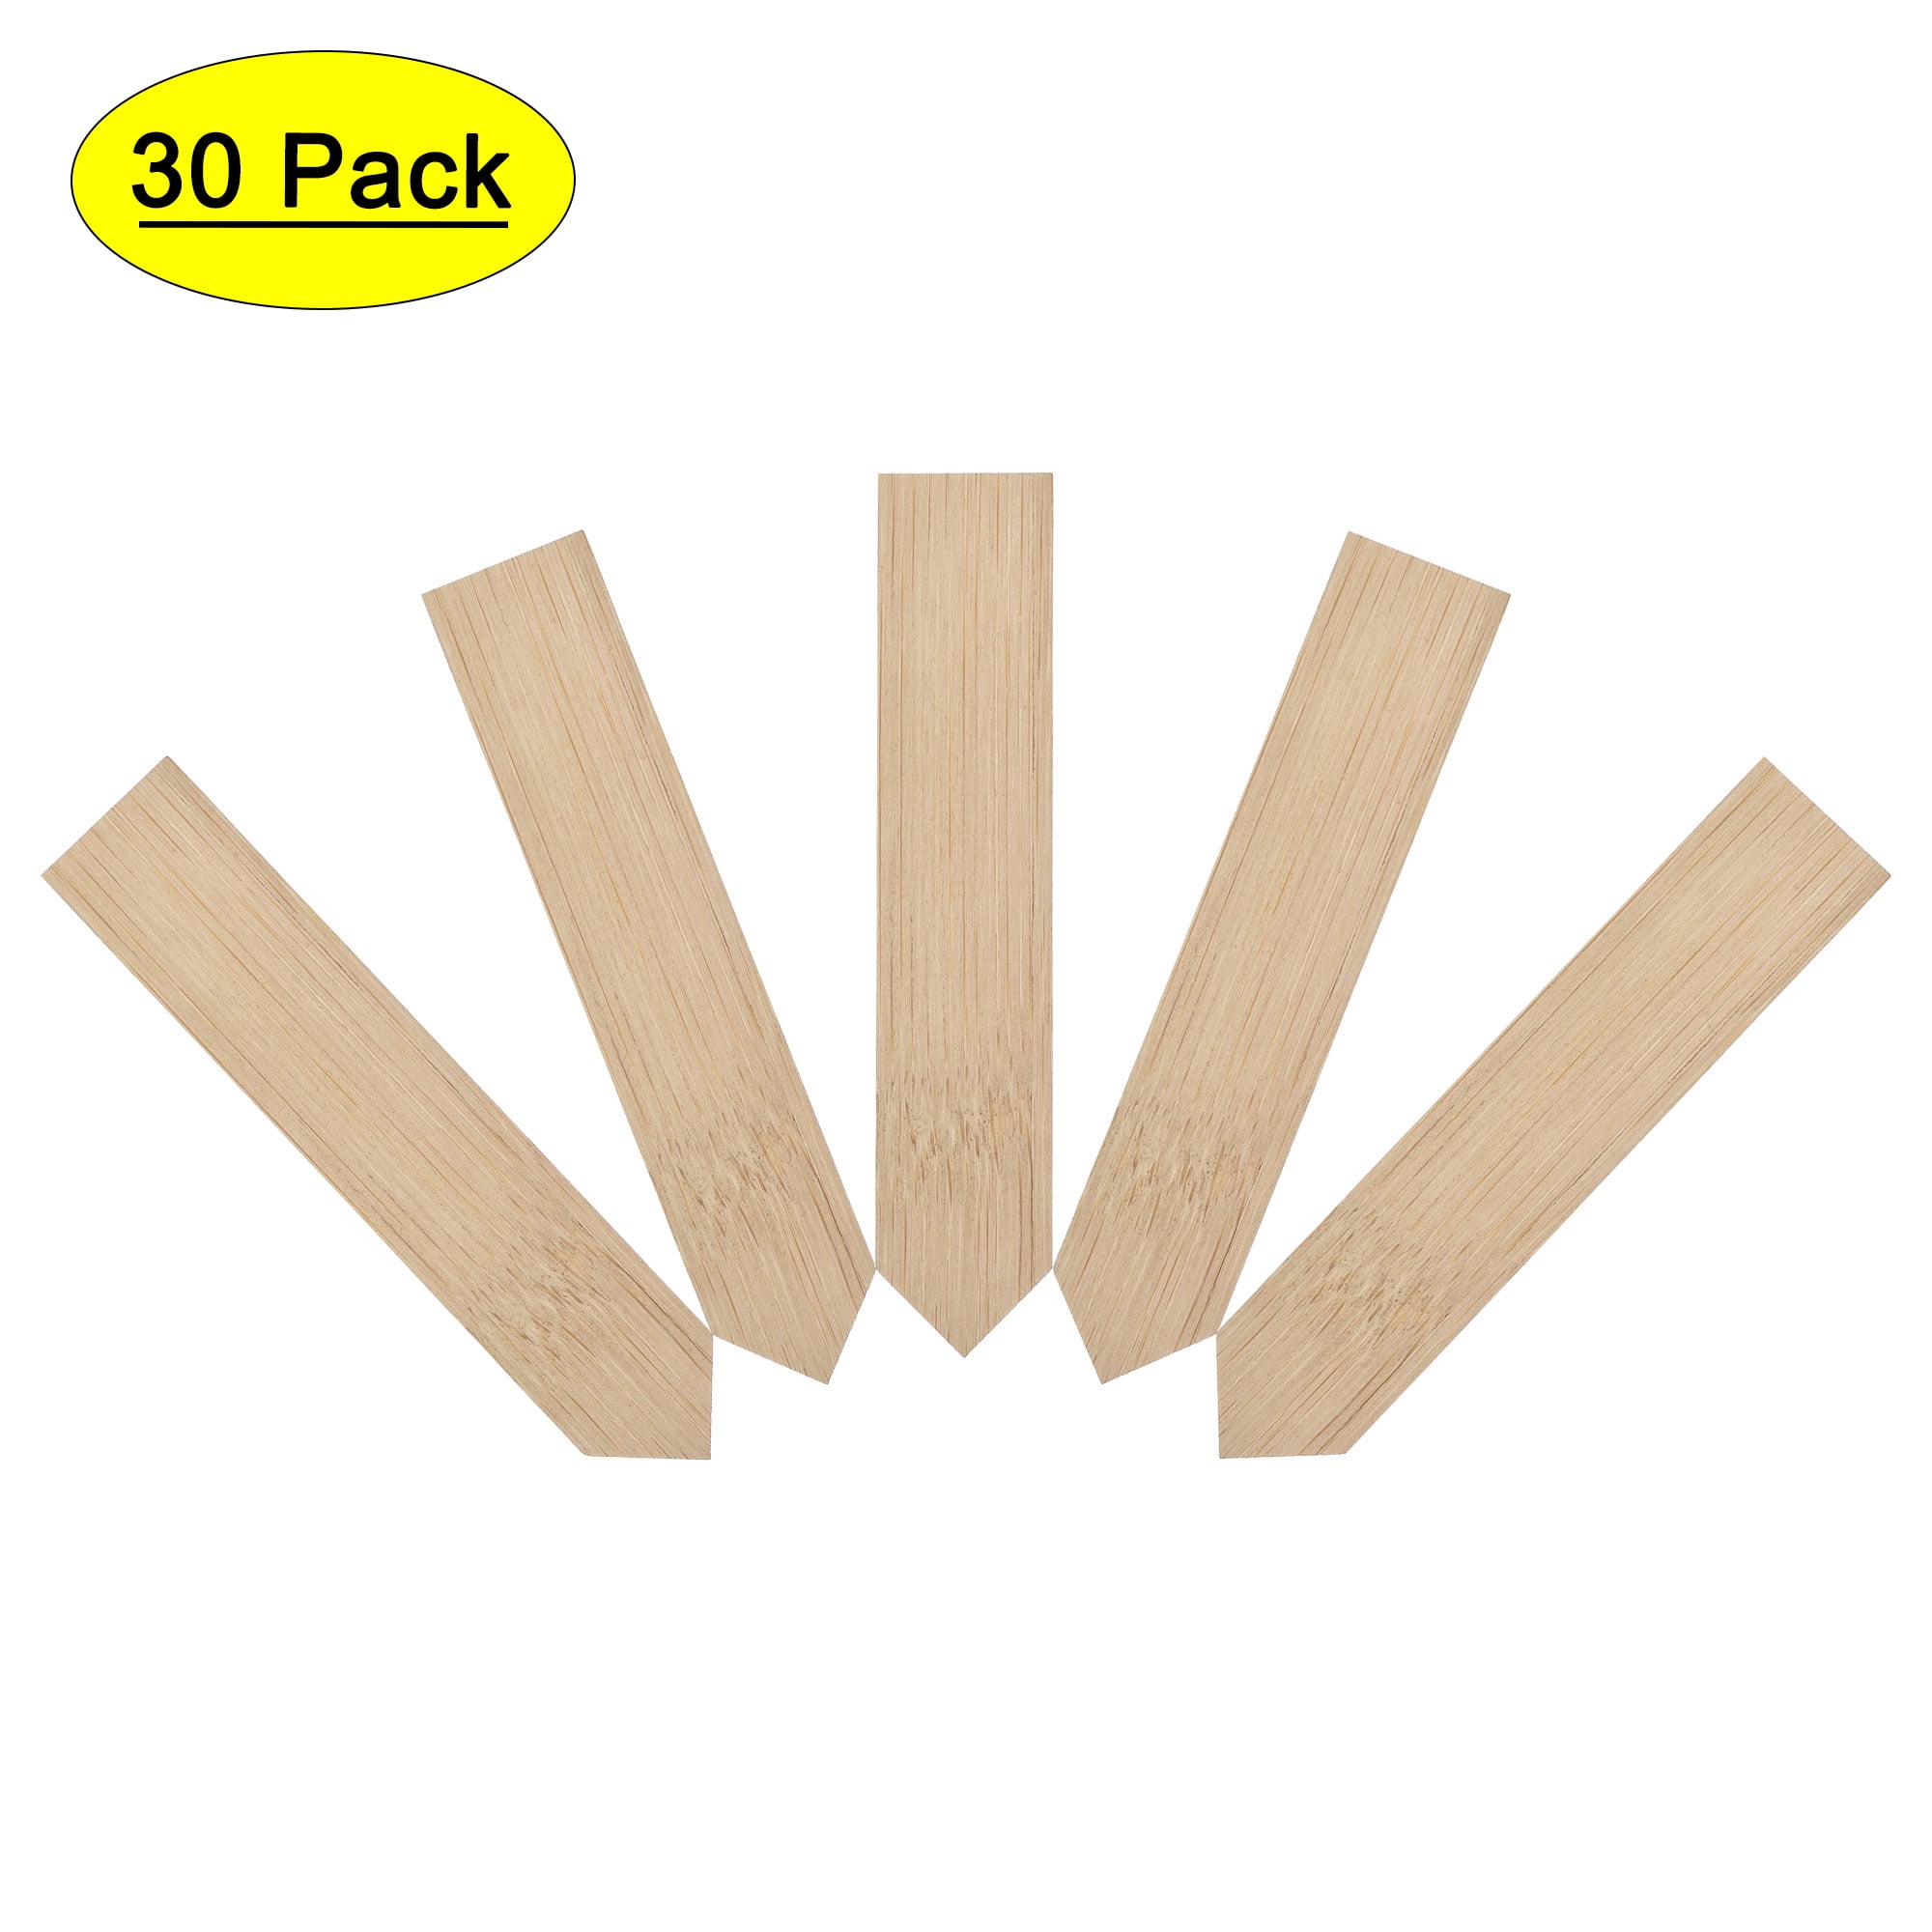 Juvale Wood Stakes 5.91 x 0.7 x 0.1 Inches Labels Herb 100-Pack Unfinished Craft Wooden Garden Stakes Garden Plant Marker Signs Potted Flower Tags for Field